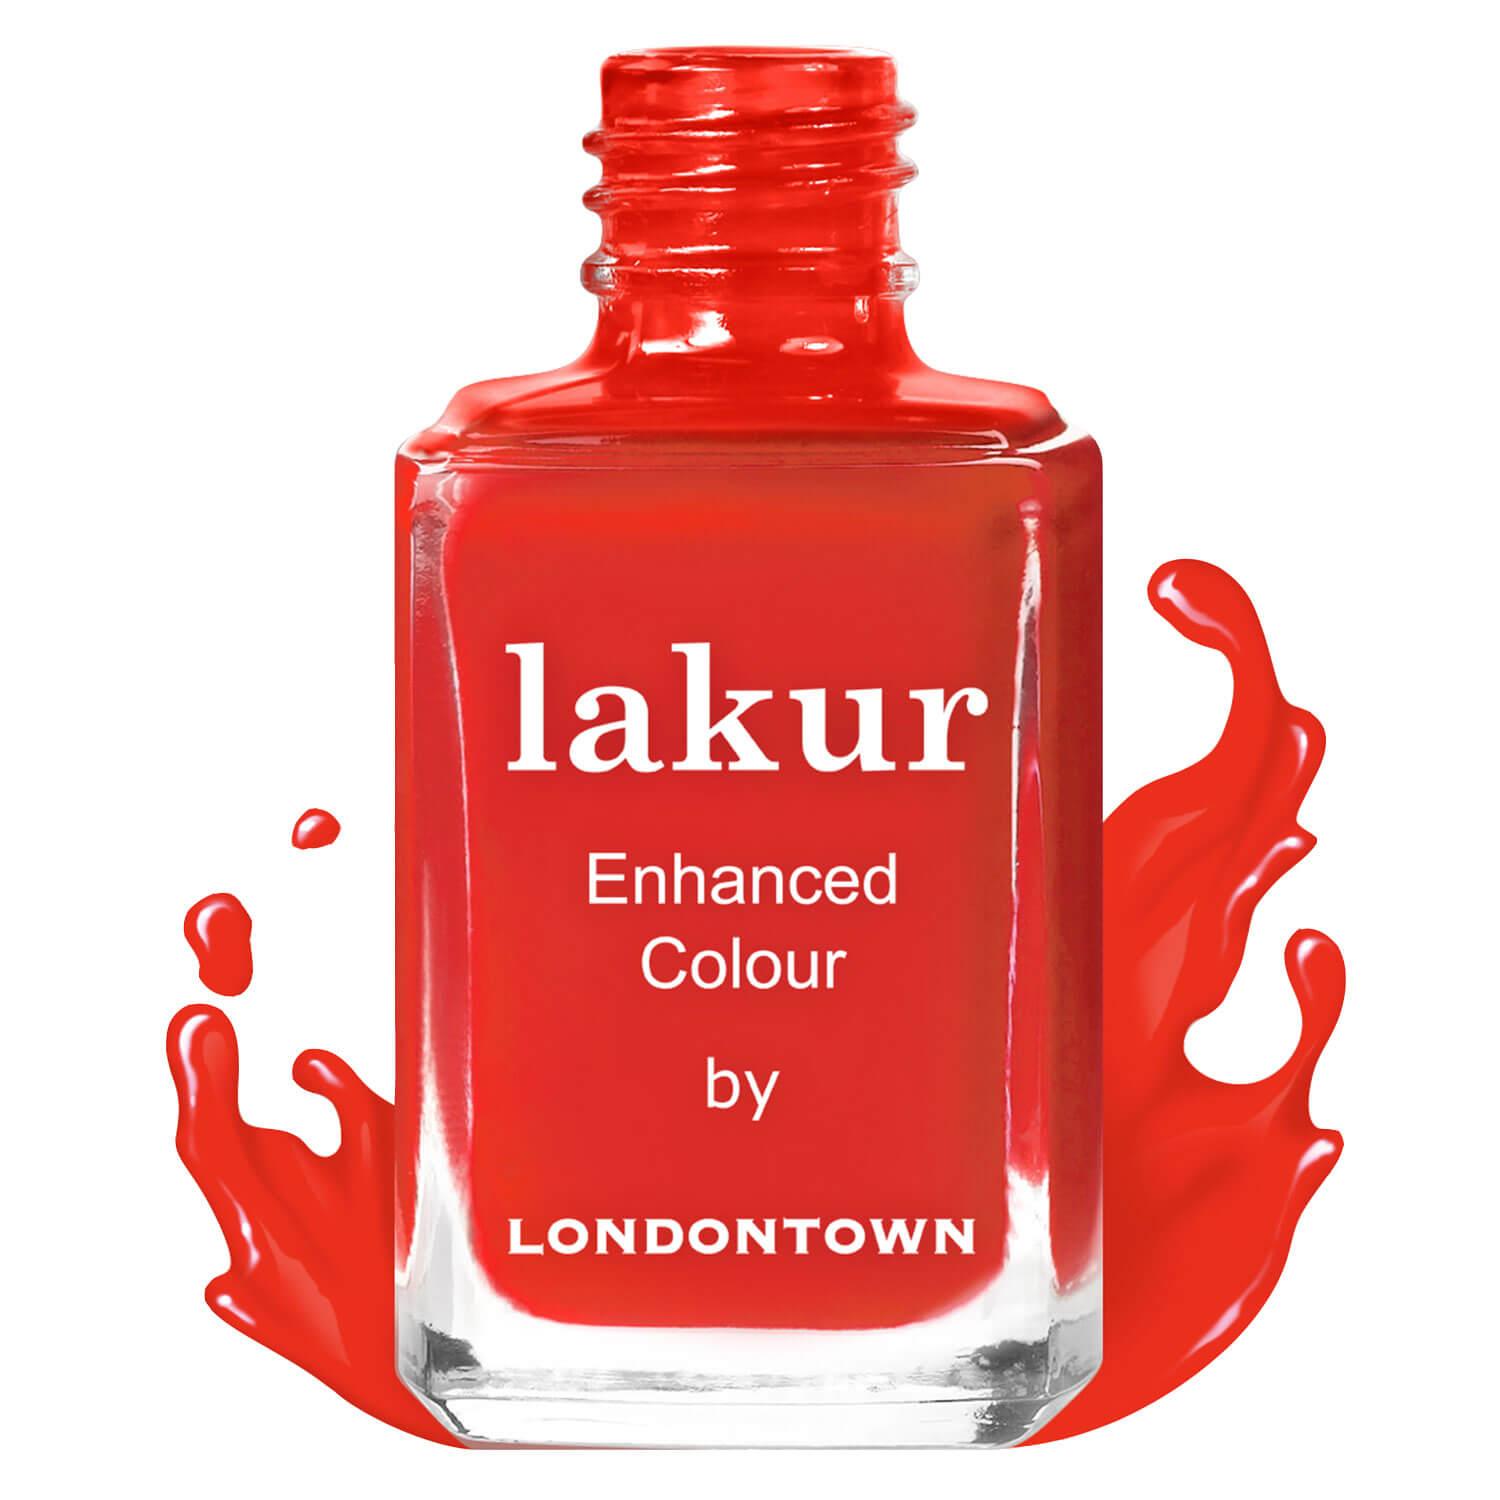 lakur - Piccadilly Square